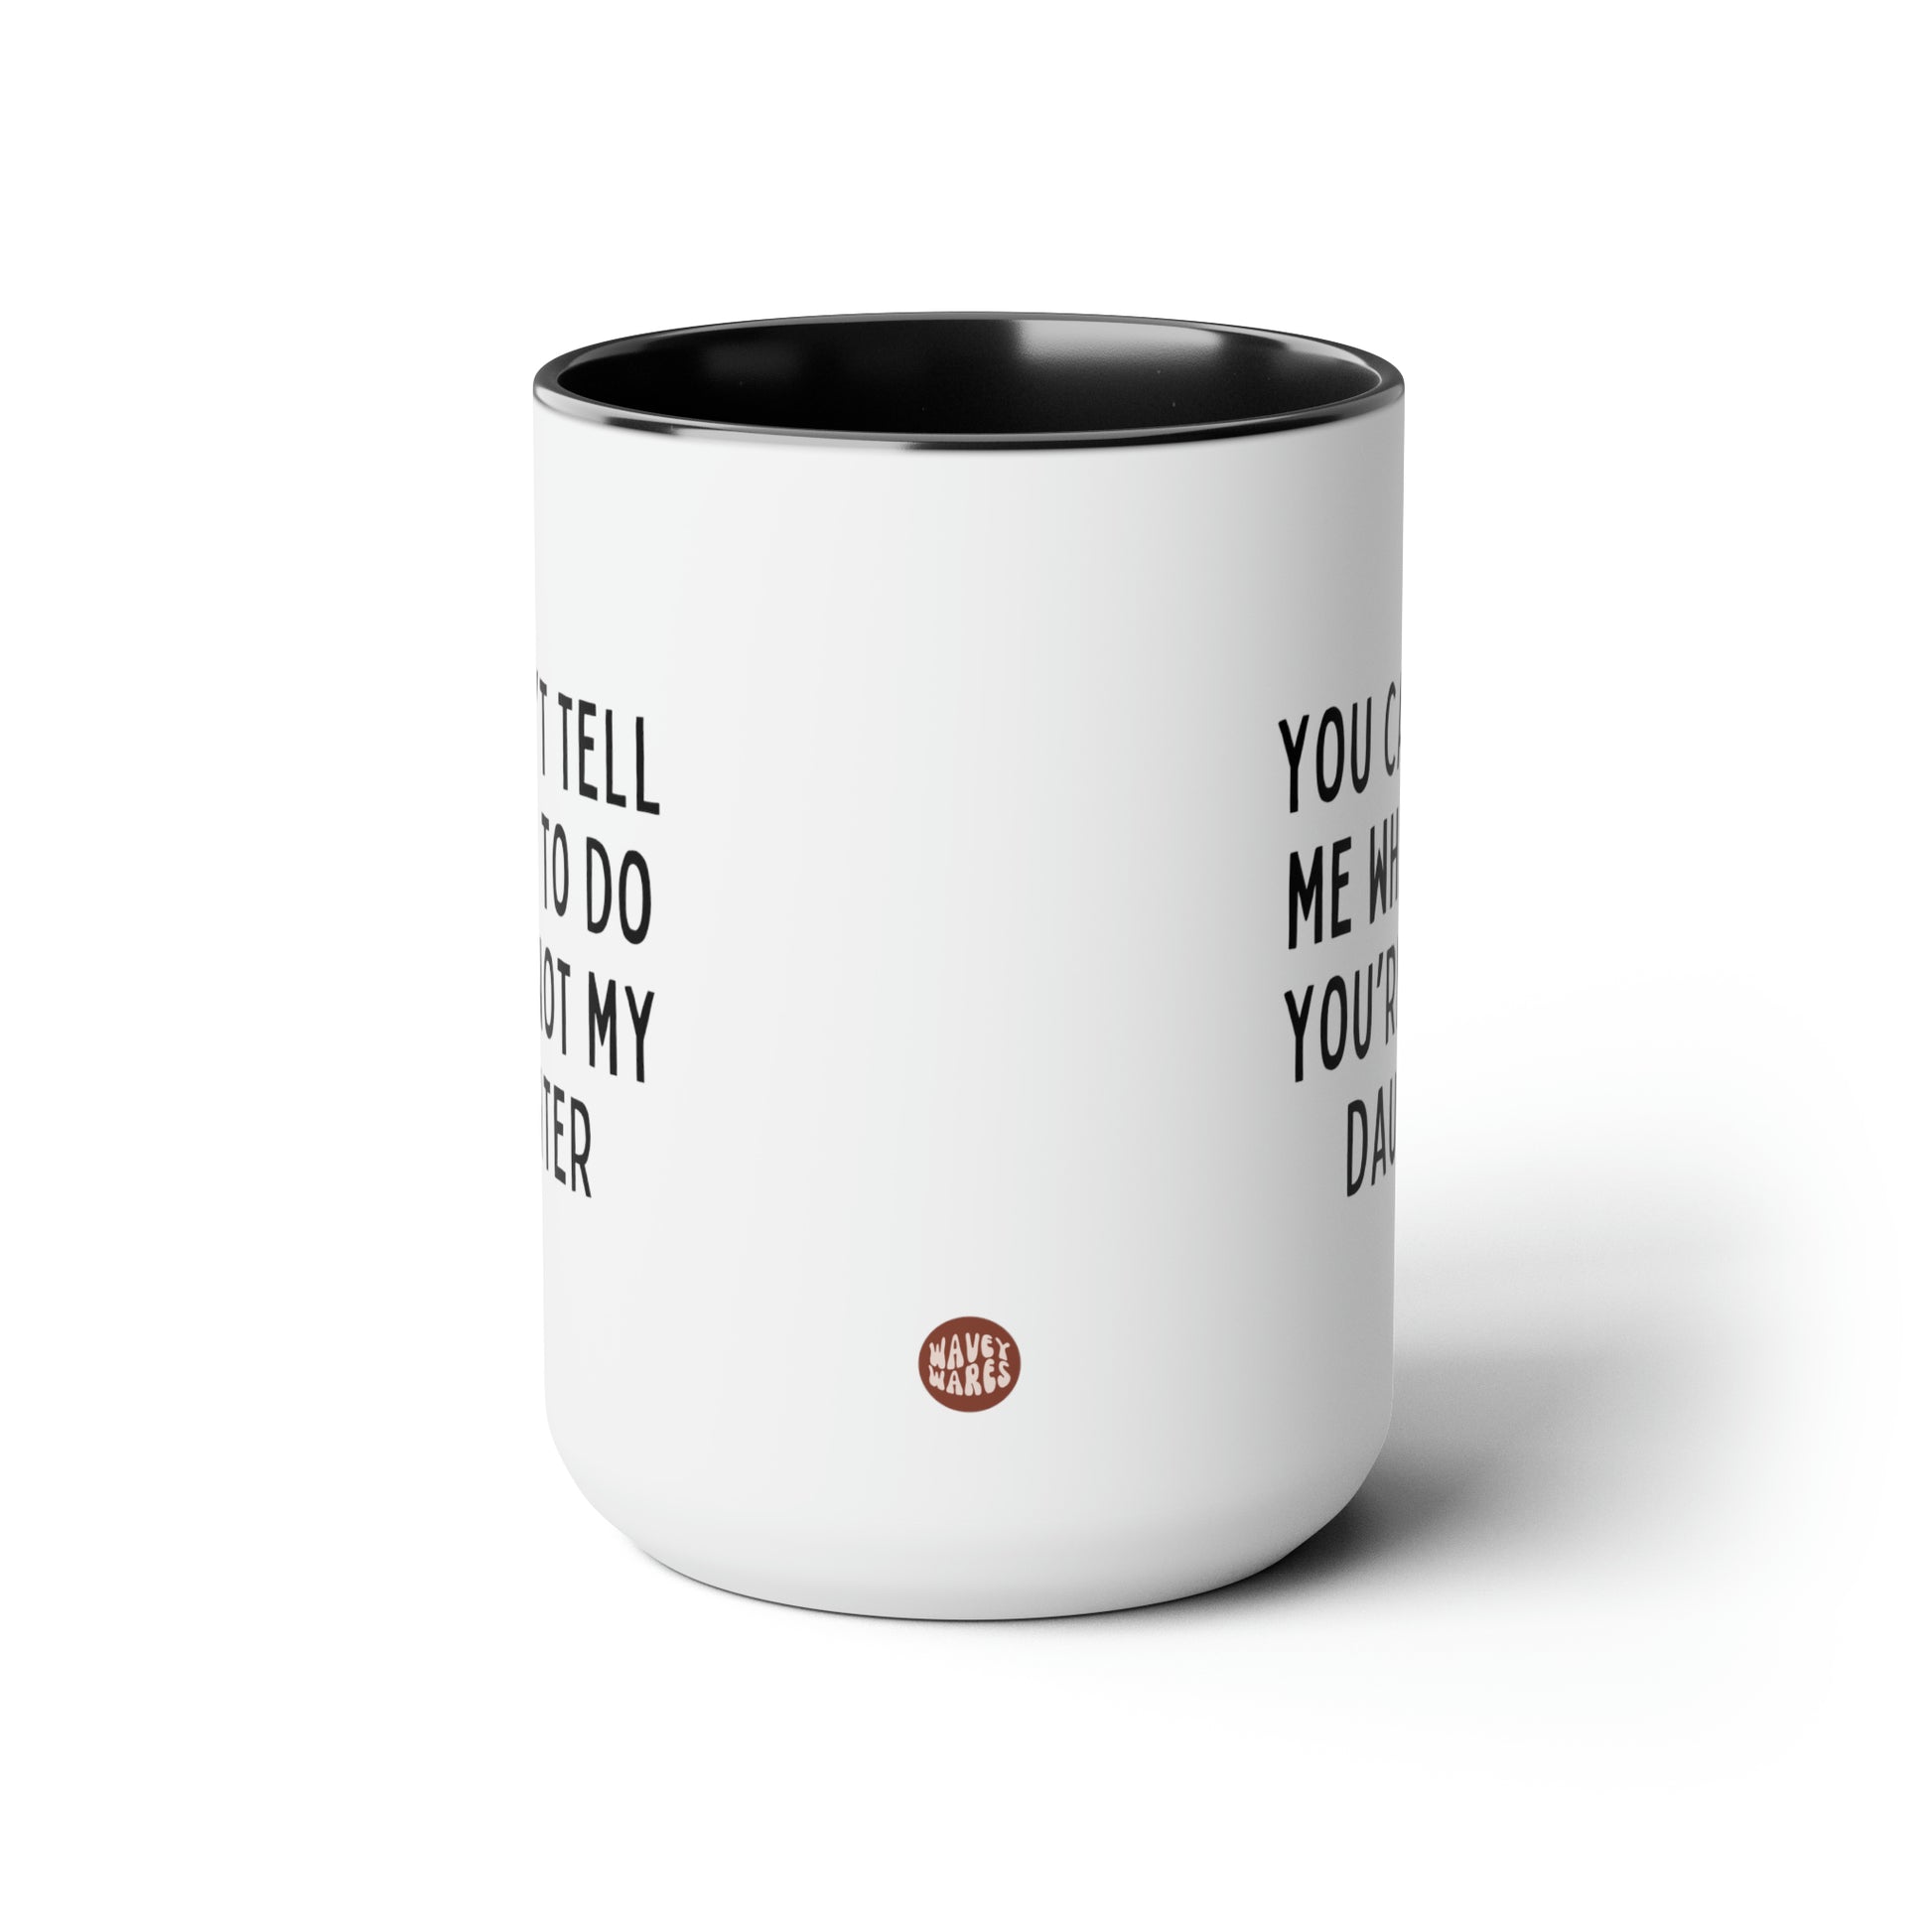 You Can't Tell Me What To Do You're Not My Daughter 15oz white with black accent funny large coffee mug gift for dad fathers day grandfather grandpa waveywares wavey wares wavywares wavy wares side